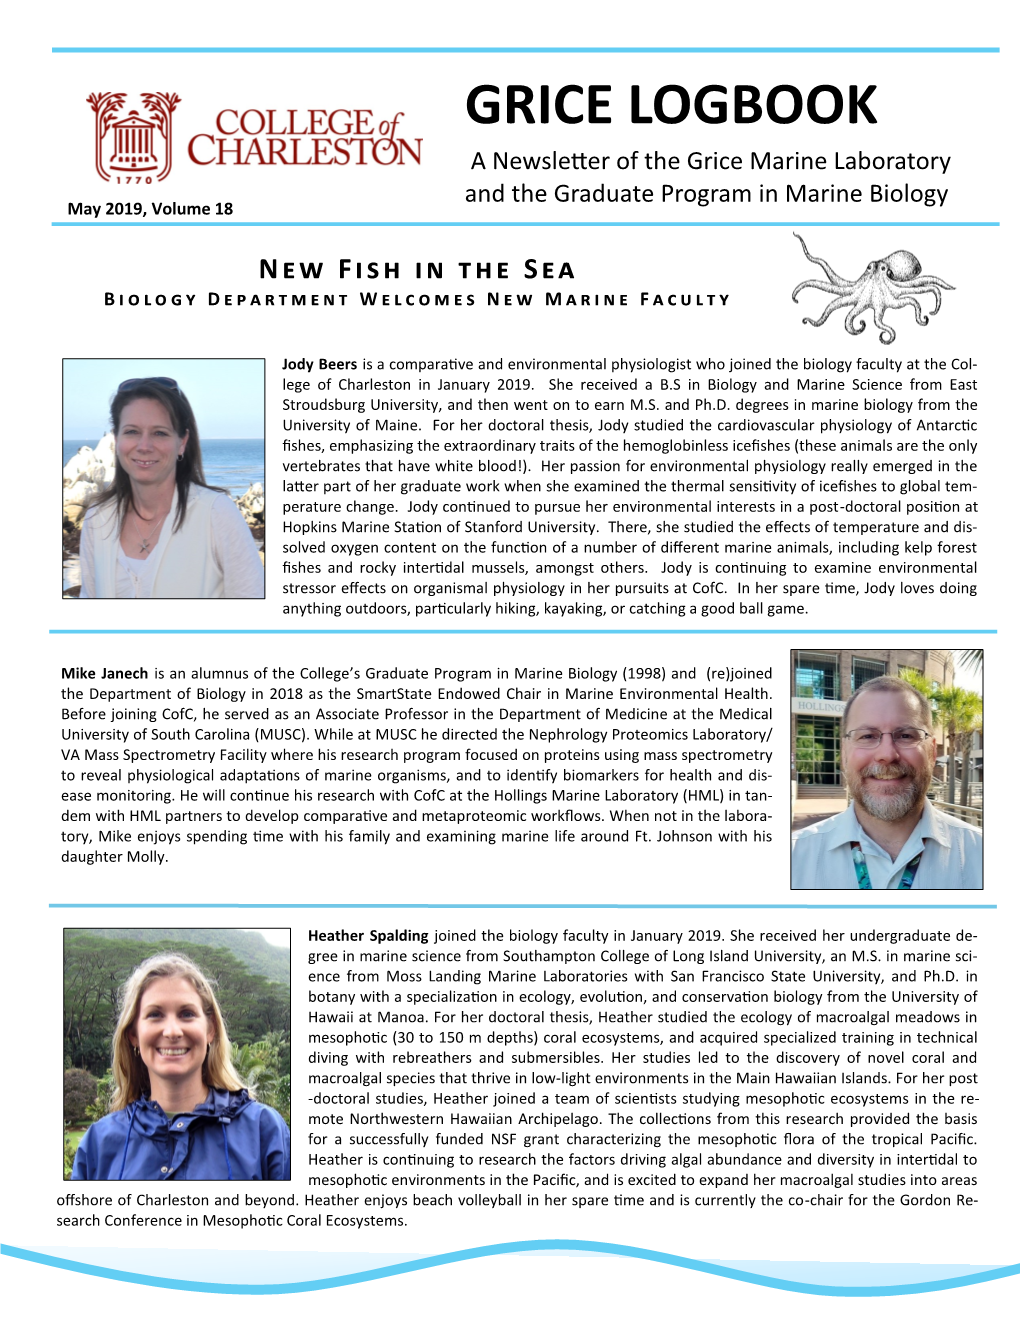 GRICE LOGBOOK a Newsletter of the Grice Marine Laboratory and the Graduate Program in Marine Biology May 2019, Volume 18